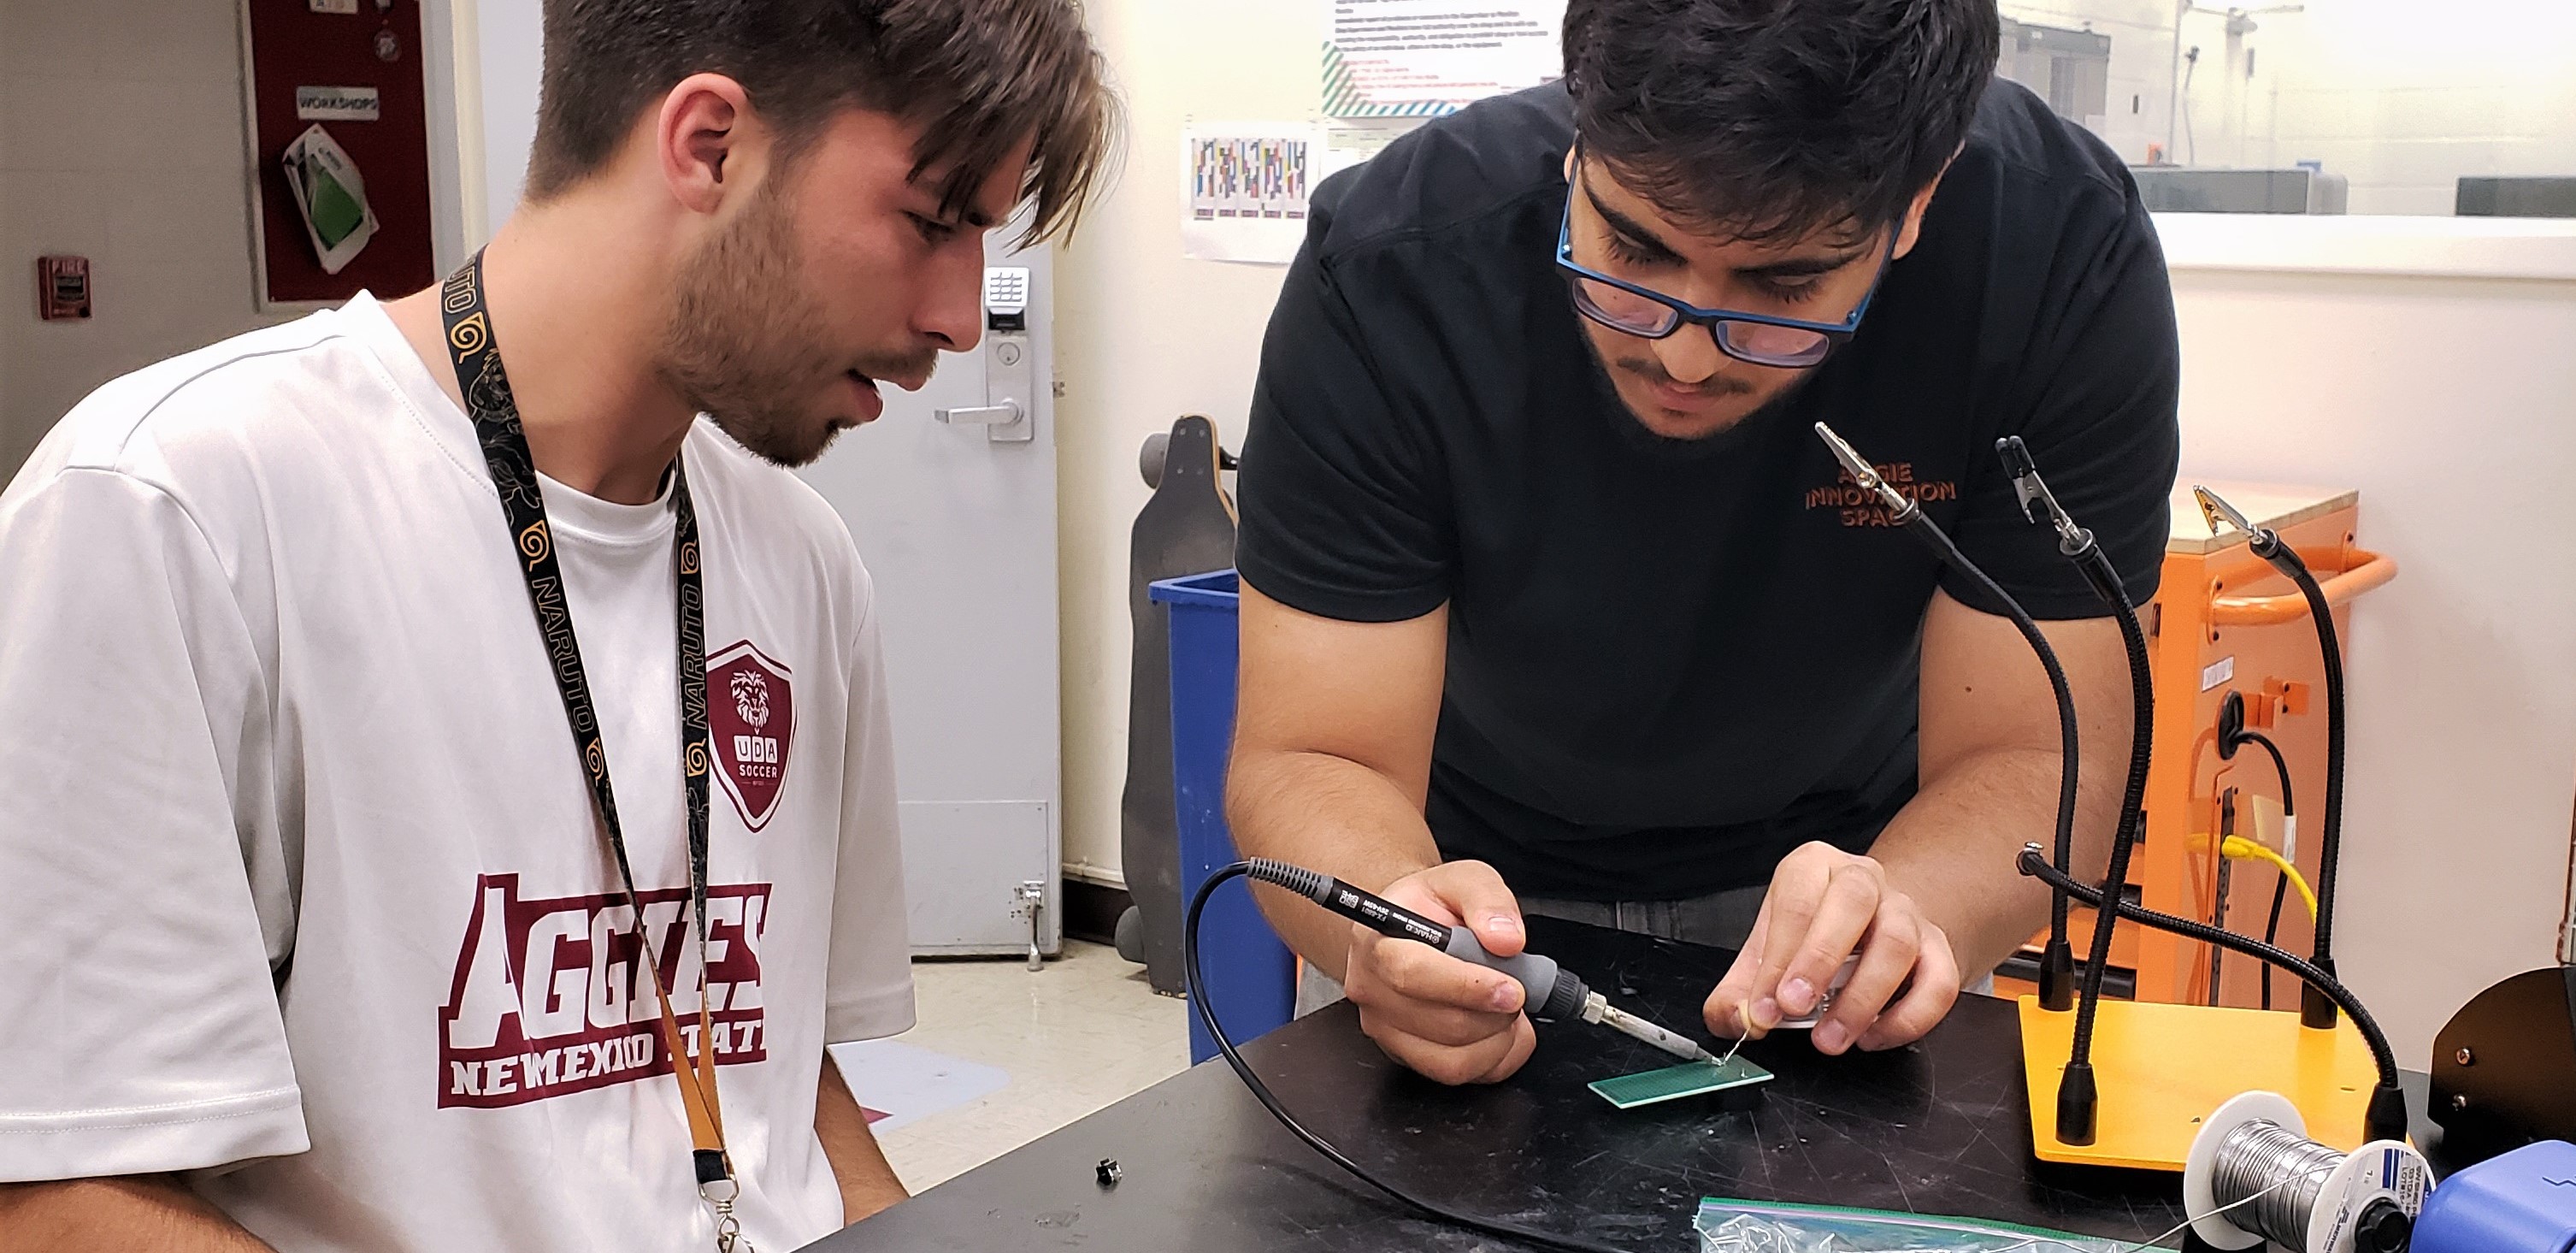 AIS student employee, Hasan Al-Shammari, assisting a student during the soldering workshop.